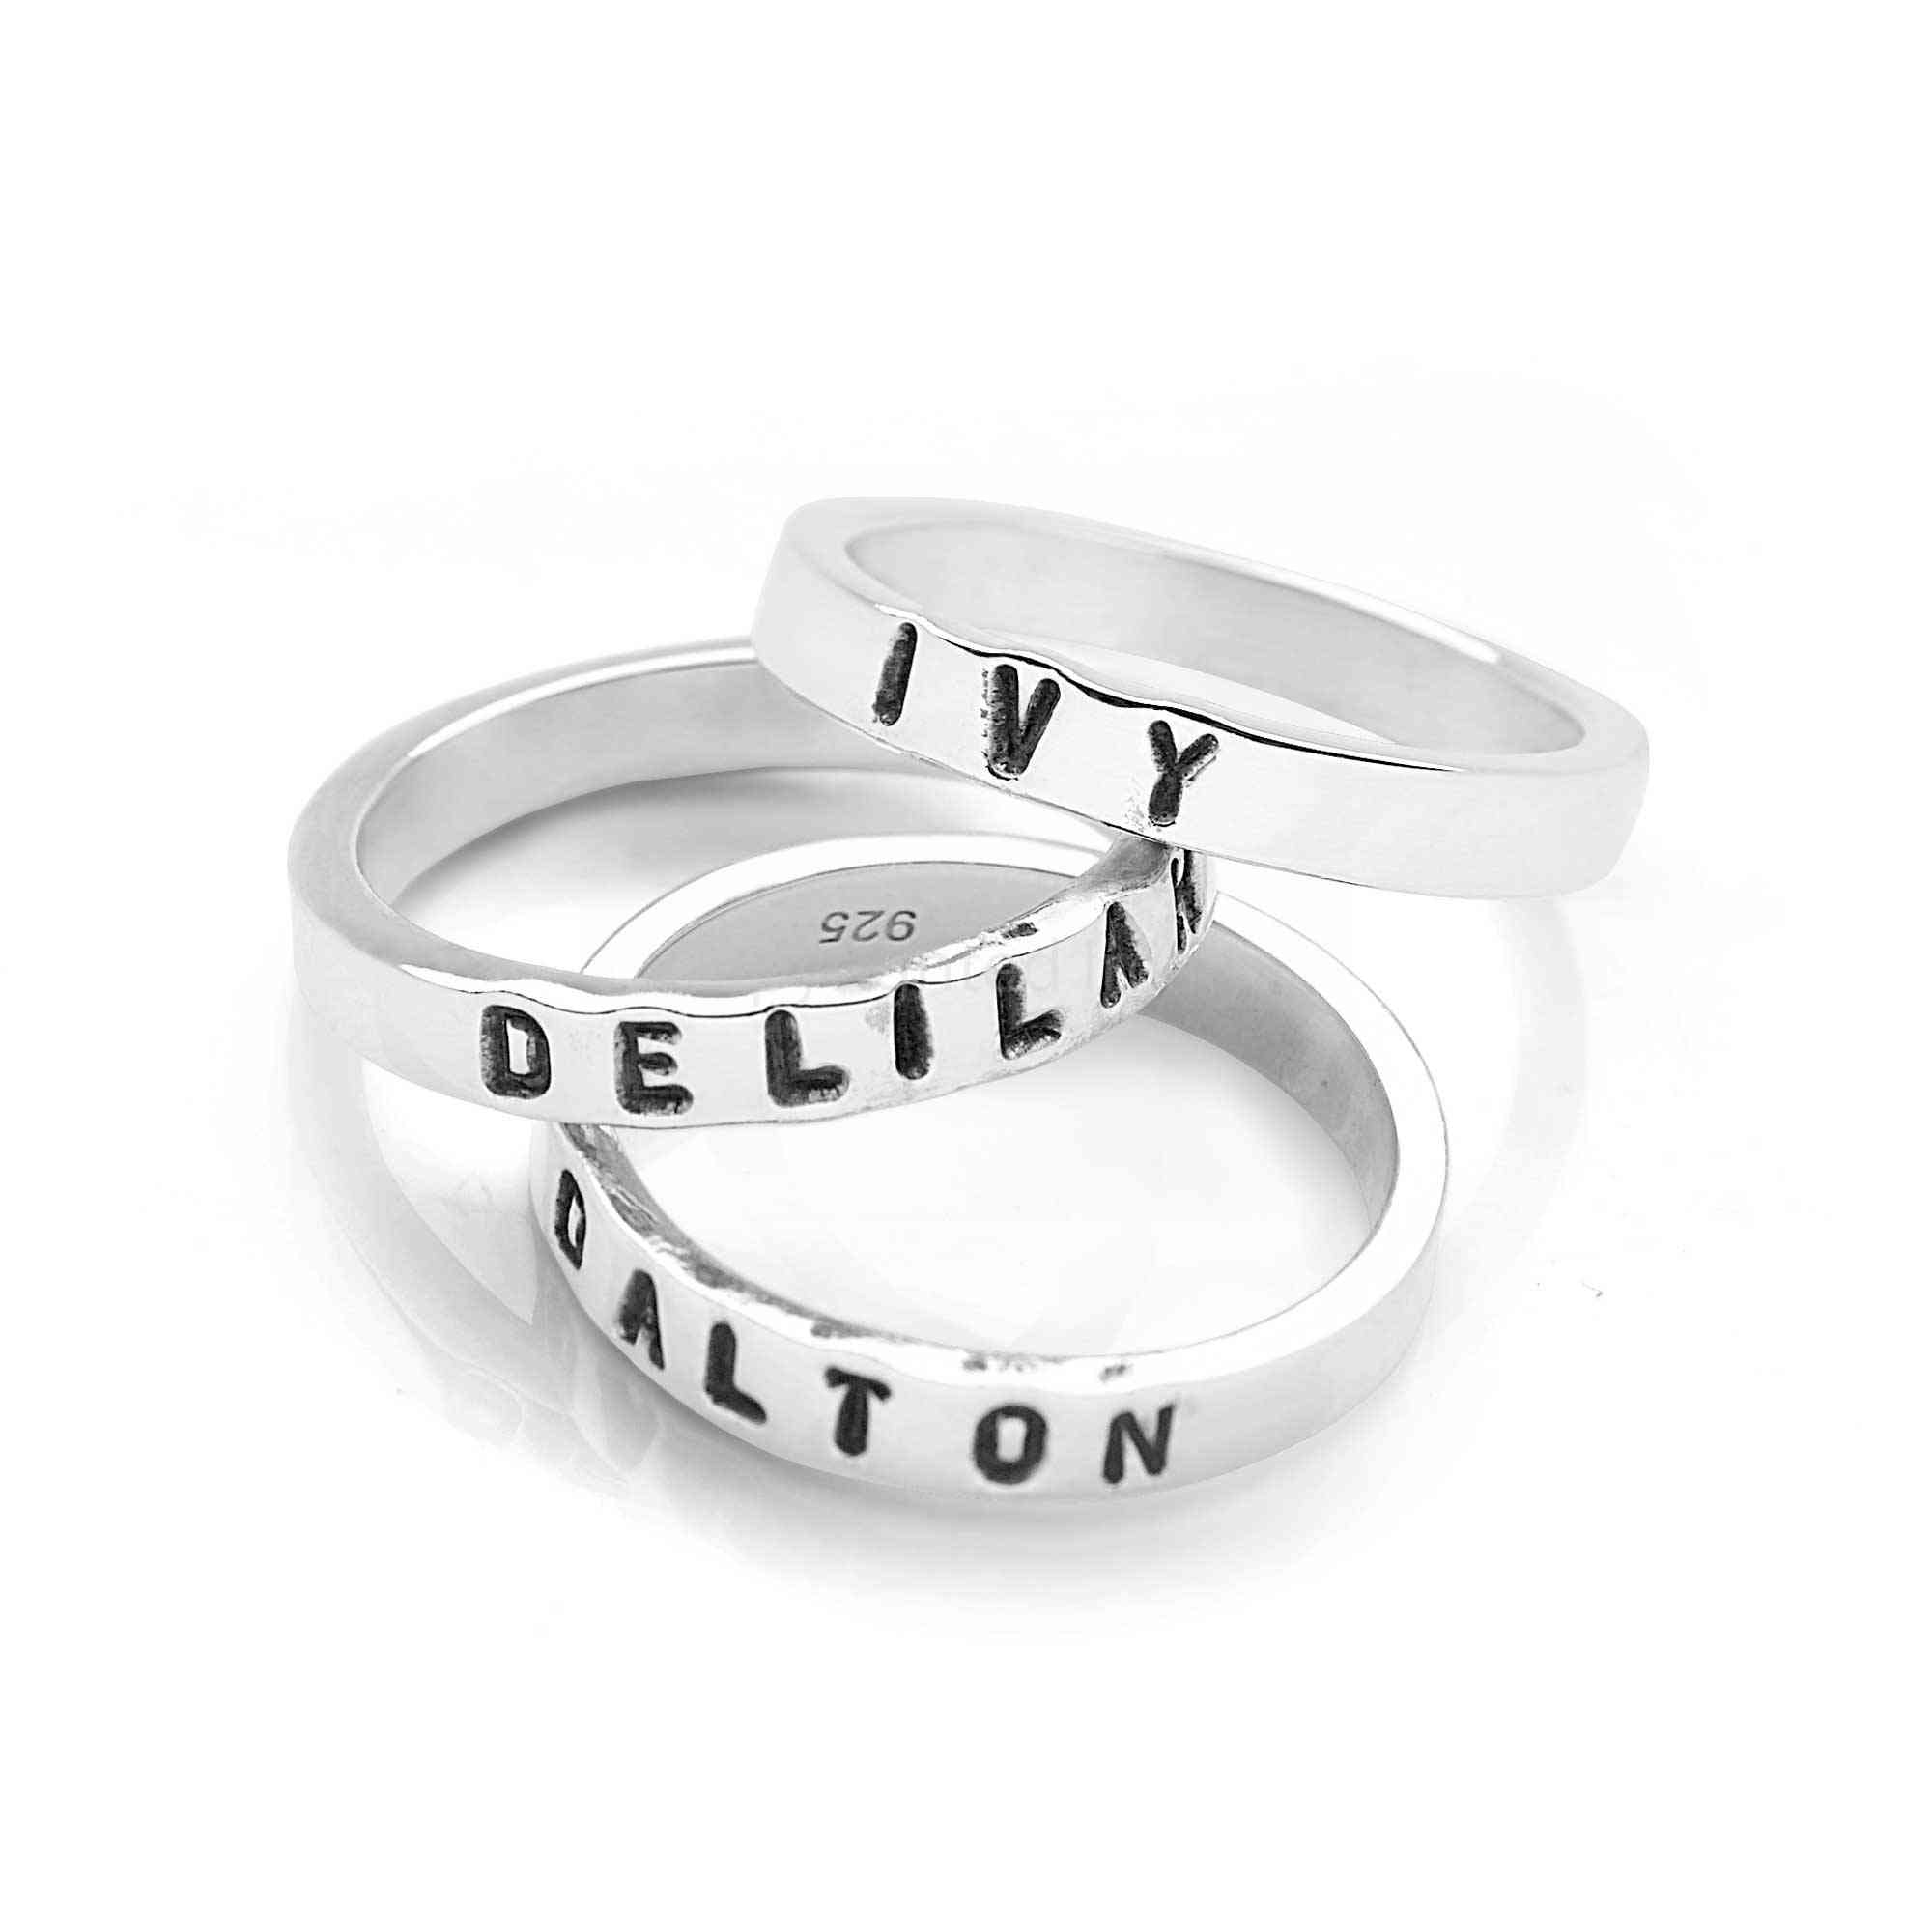 Personalized Custom Engraving 925 Sterling Silver Adjustable Ring $29.31  For Sale [categories]